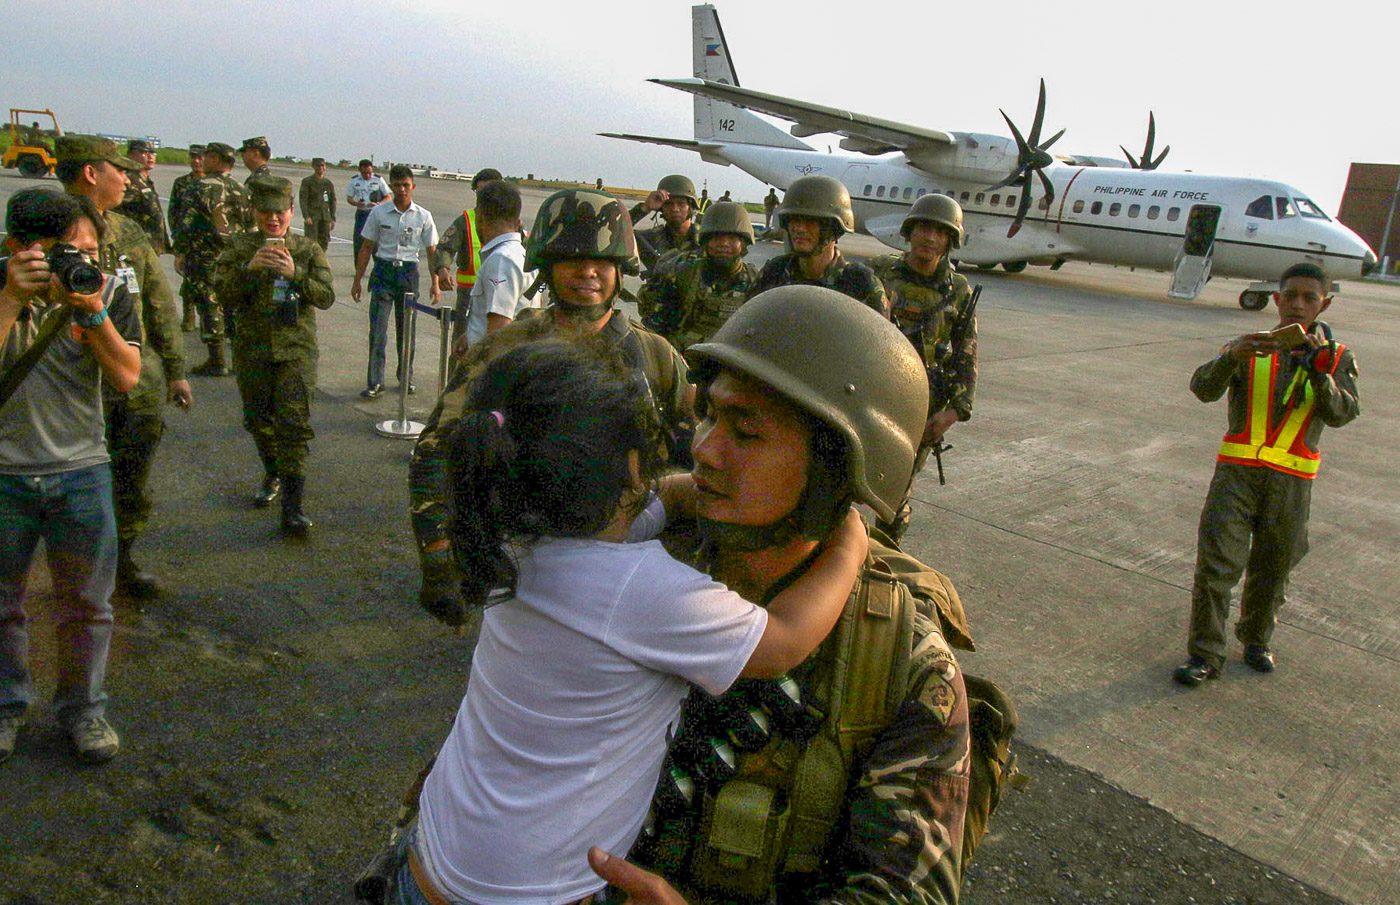 BACK HOME. A soldier from the 1st Infantry Batallion 2nd Infrantry division is greeted by his child during their arrival at Villamor airbase in Pasay City on October 20, 2017 after a 5-month tour of duty in Marawi. Photo by Inoue Jaena/Rappler  